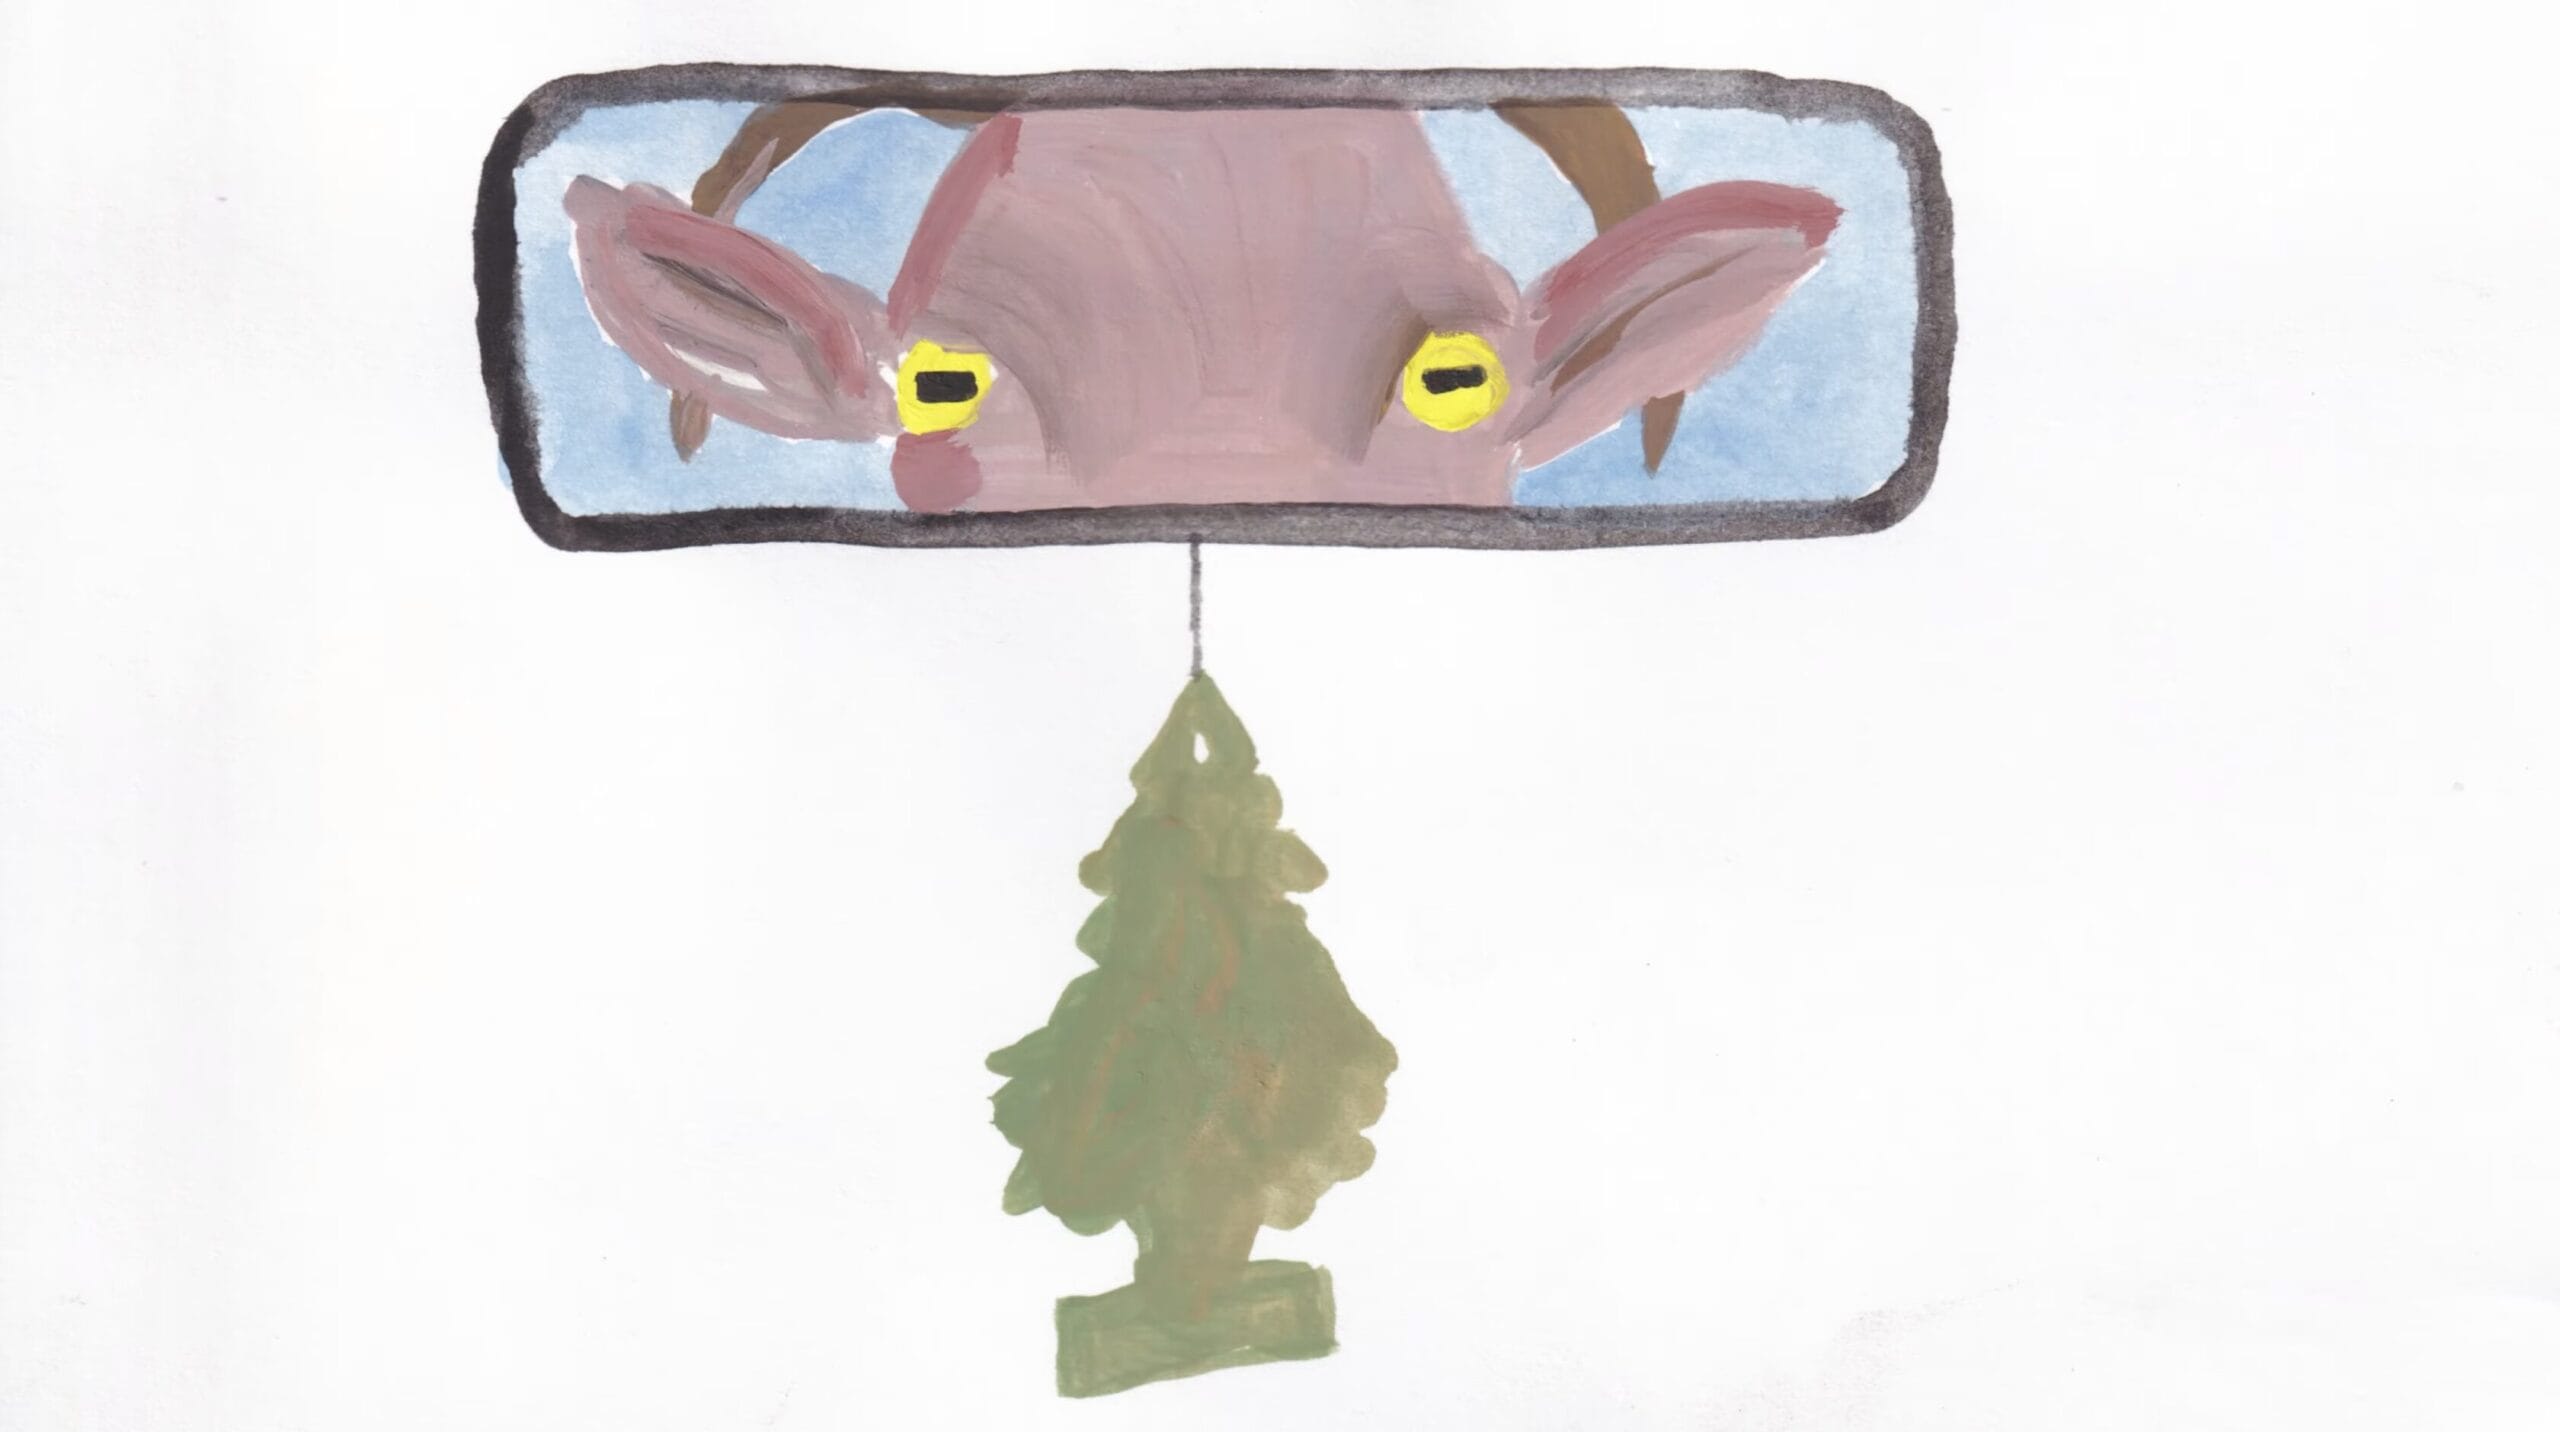 a rear-view mirror in a car shows the eyes of a goat and a tree air freshener